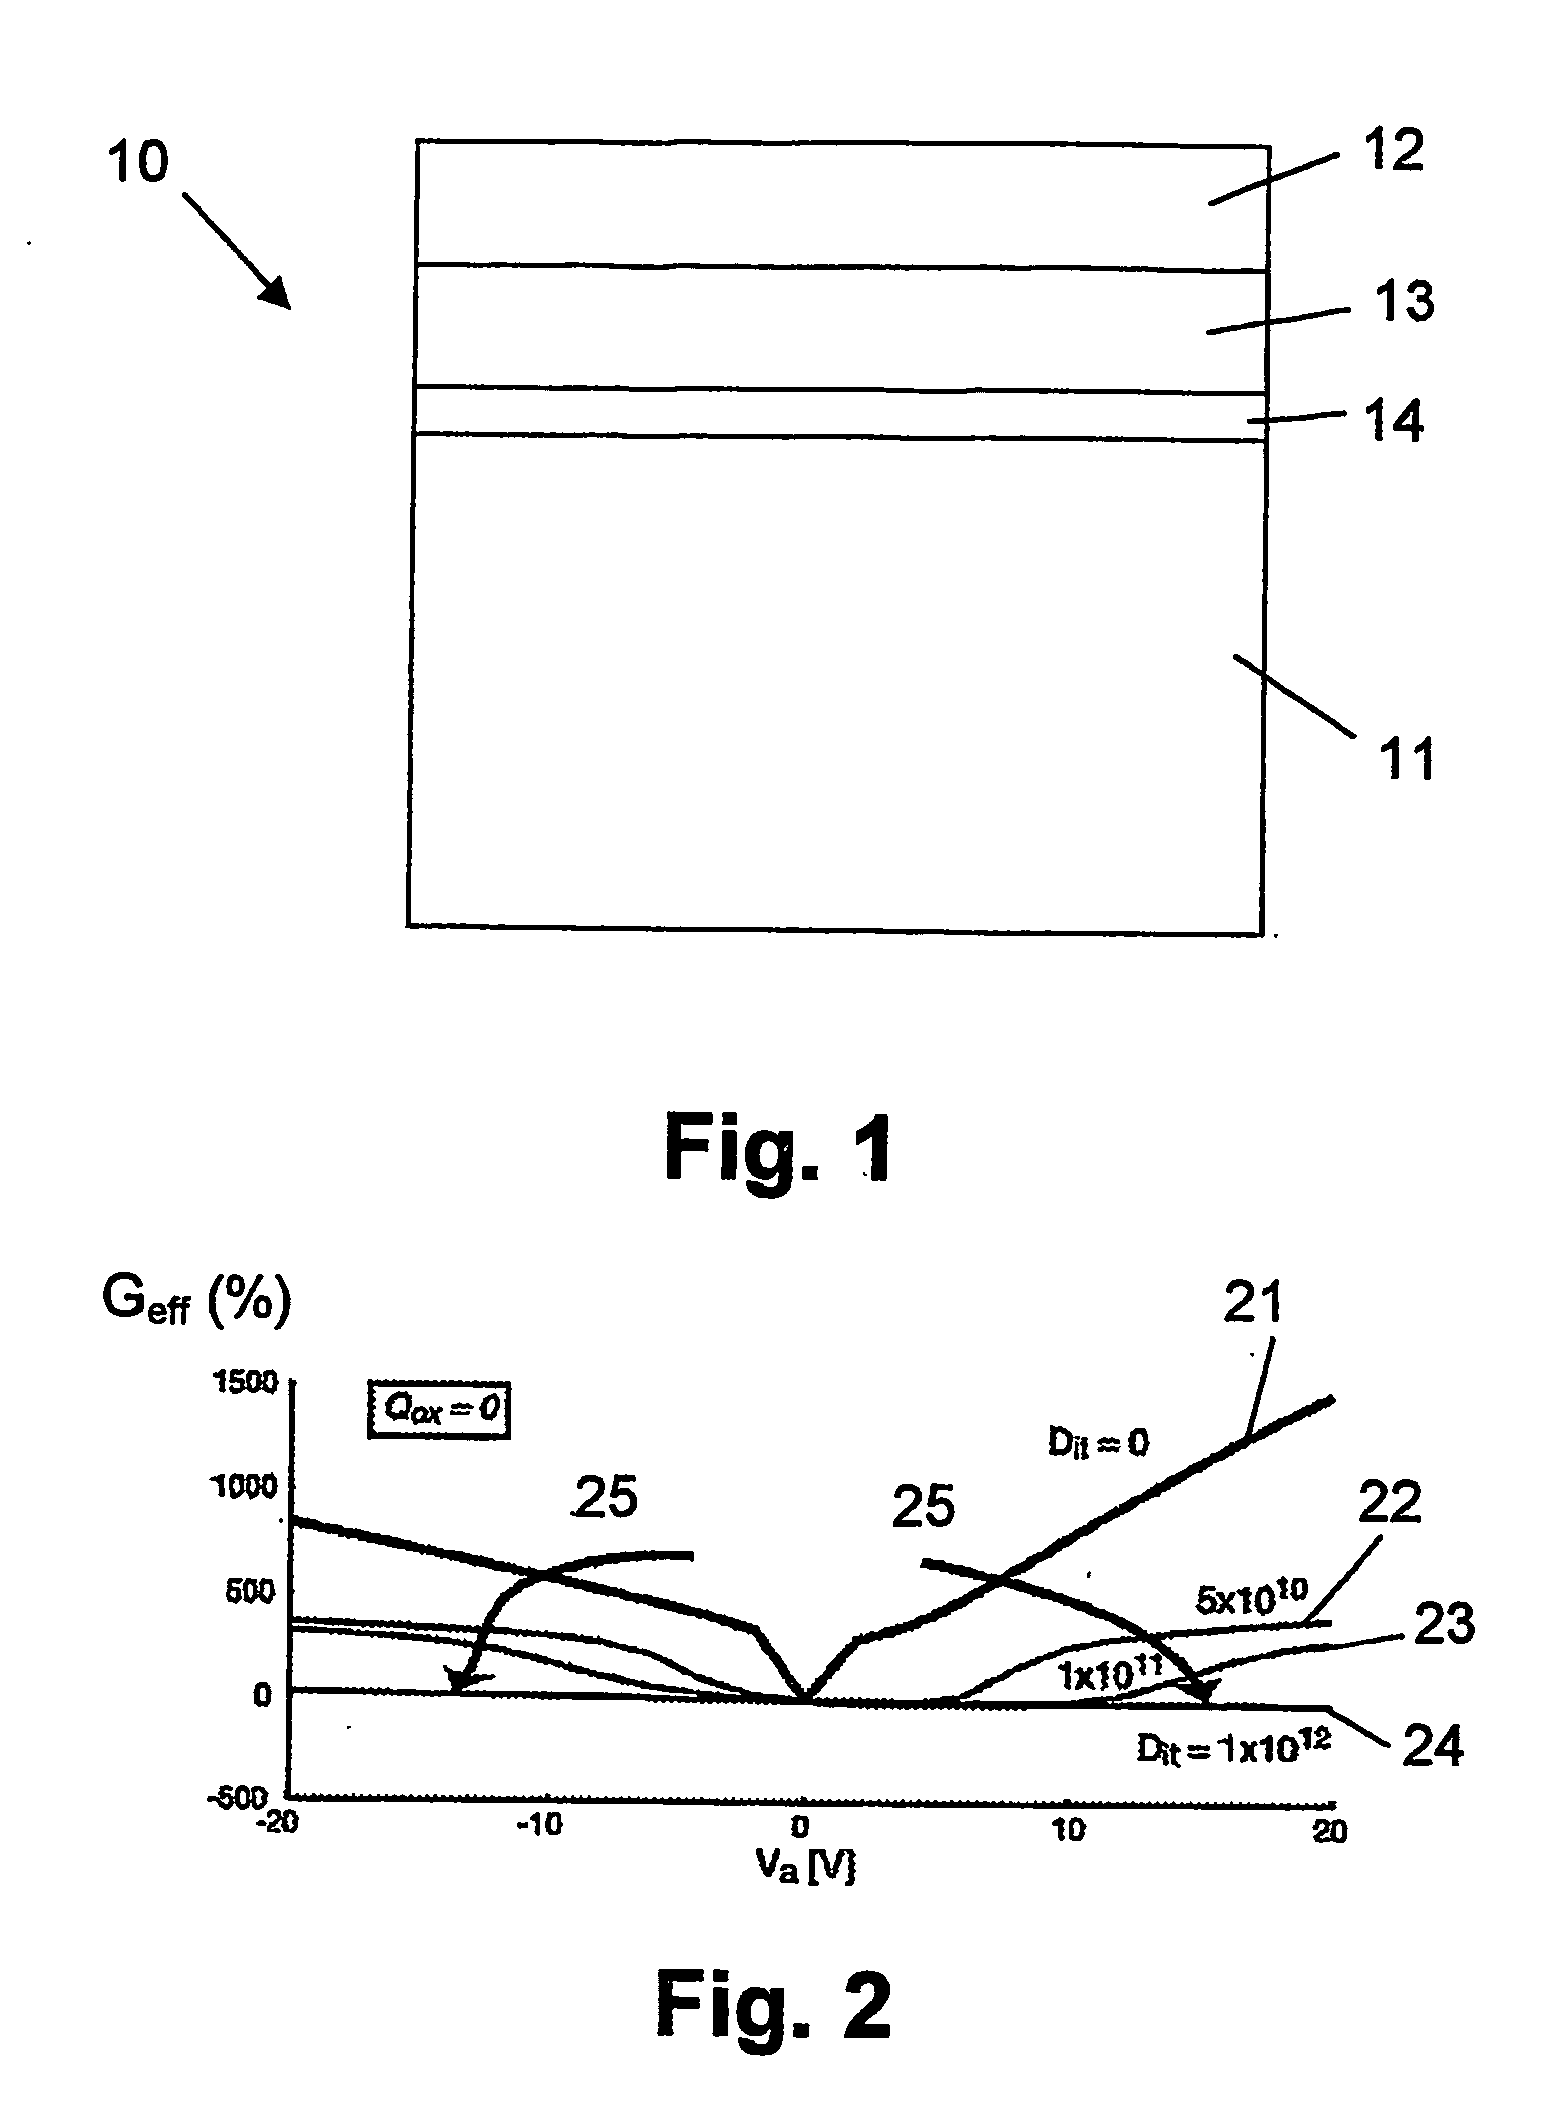 Method of manufacturing a multilayer semiconductor structure with reduced ohmic losses